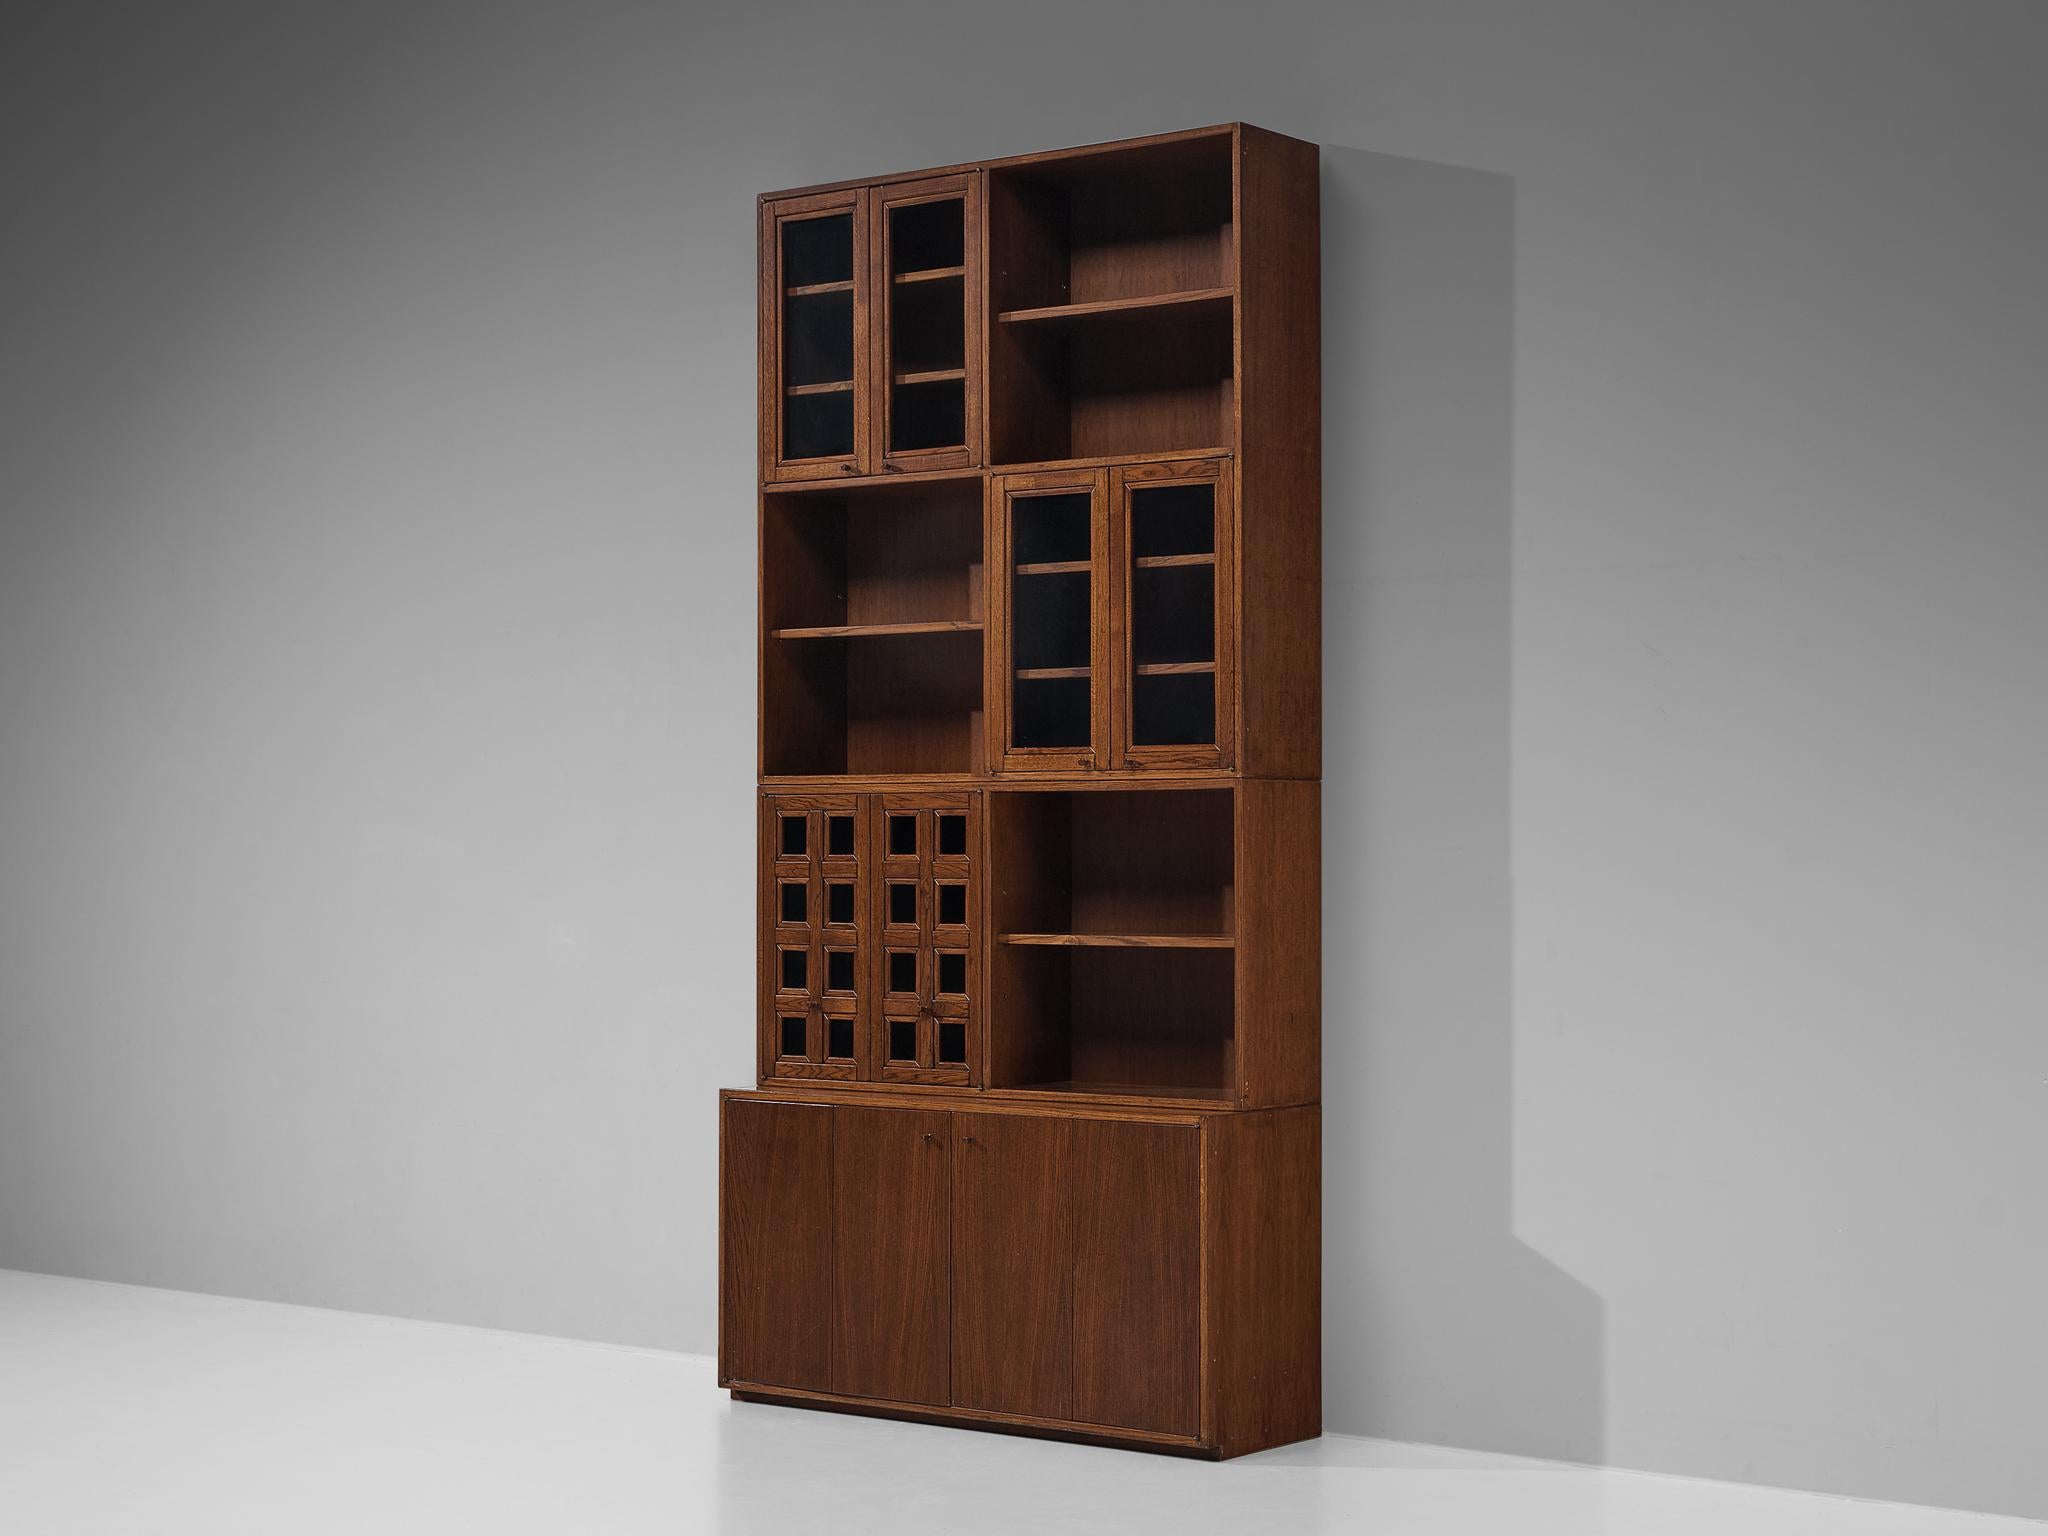 Giuseppe Rivadossi, bookcase, oak, glass, Italy, 1975.

An exceptional library by the Italian sculptor and designer Giuseppe Rivadossi, featuring a high level of craftsmanship in woodwork. The sideboard offers plenty of space to display books and